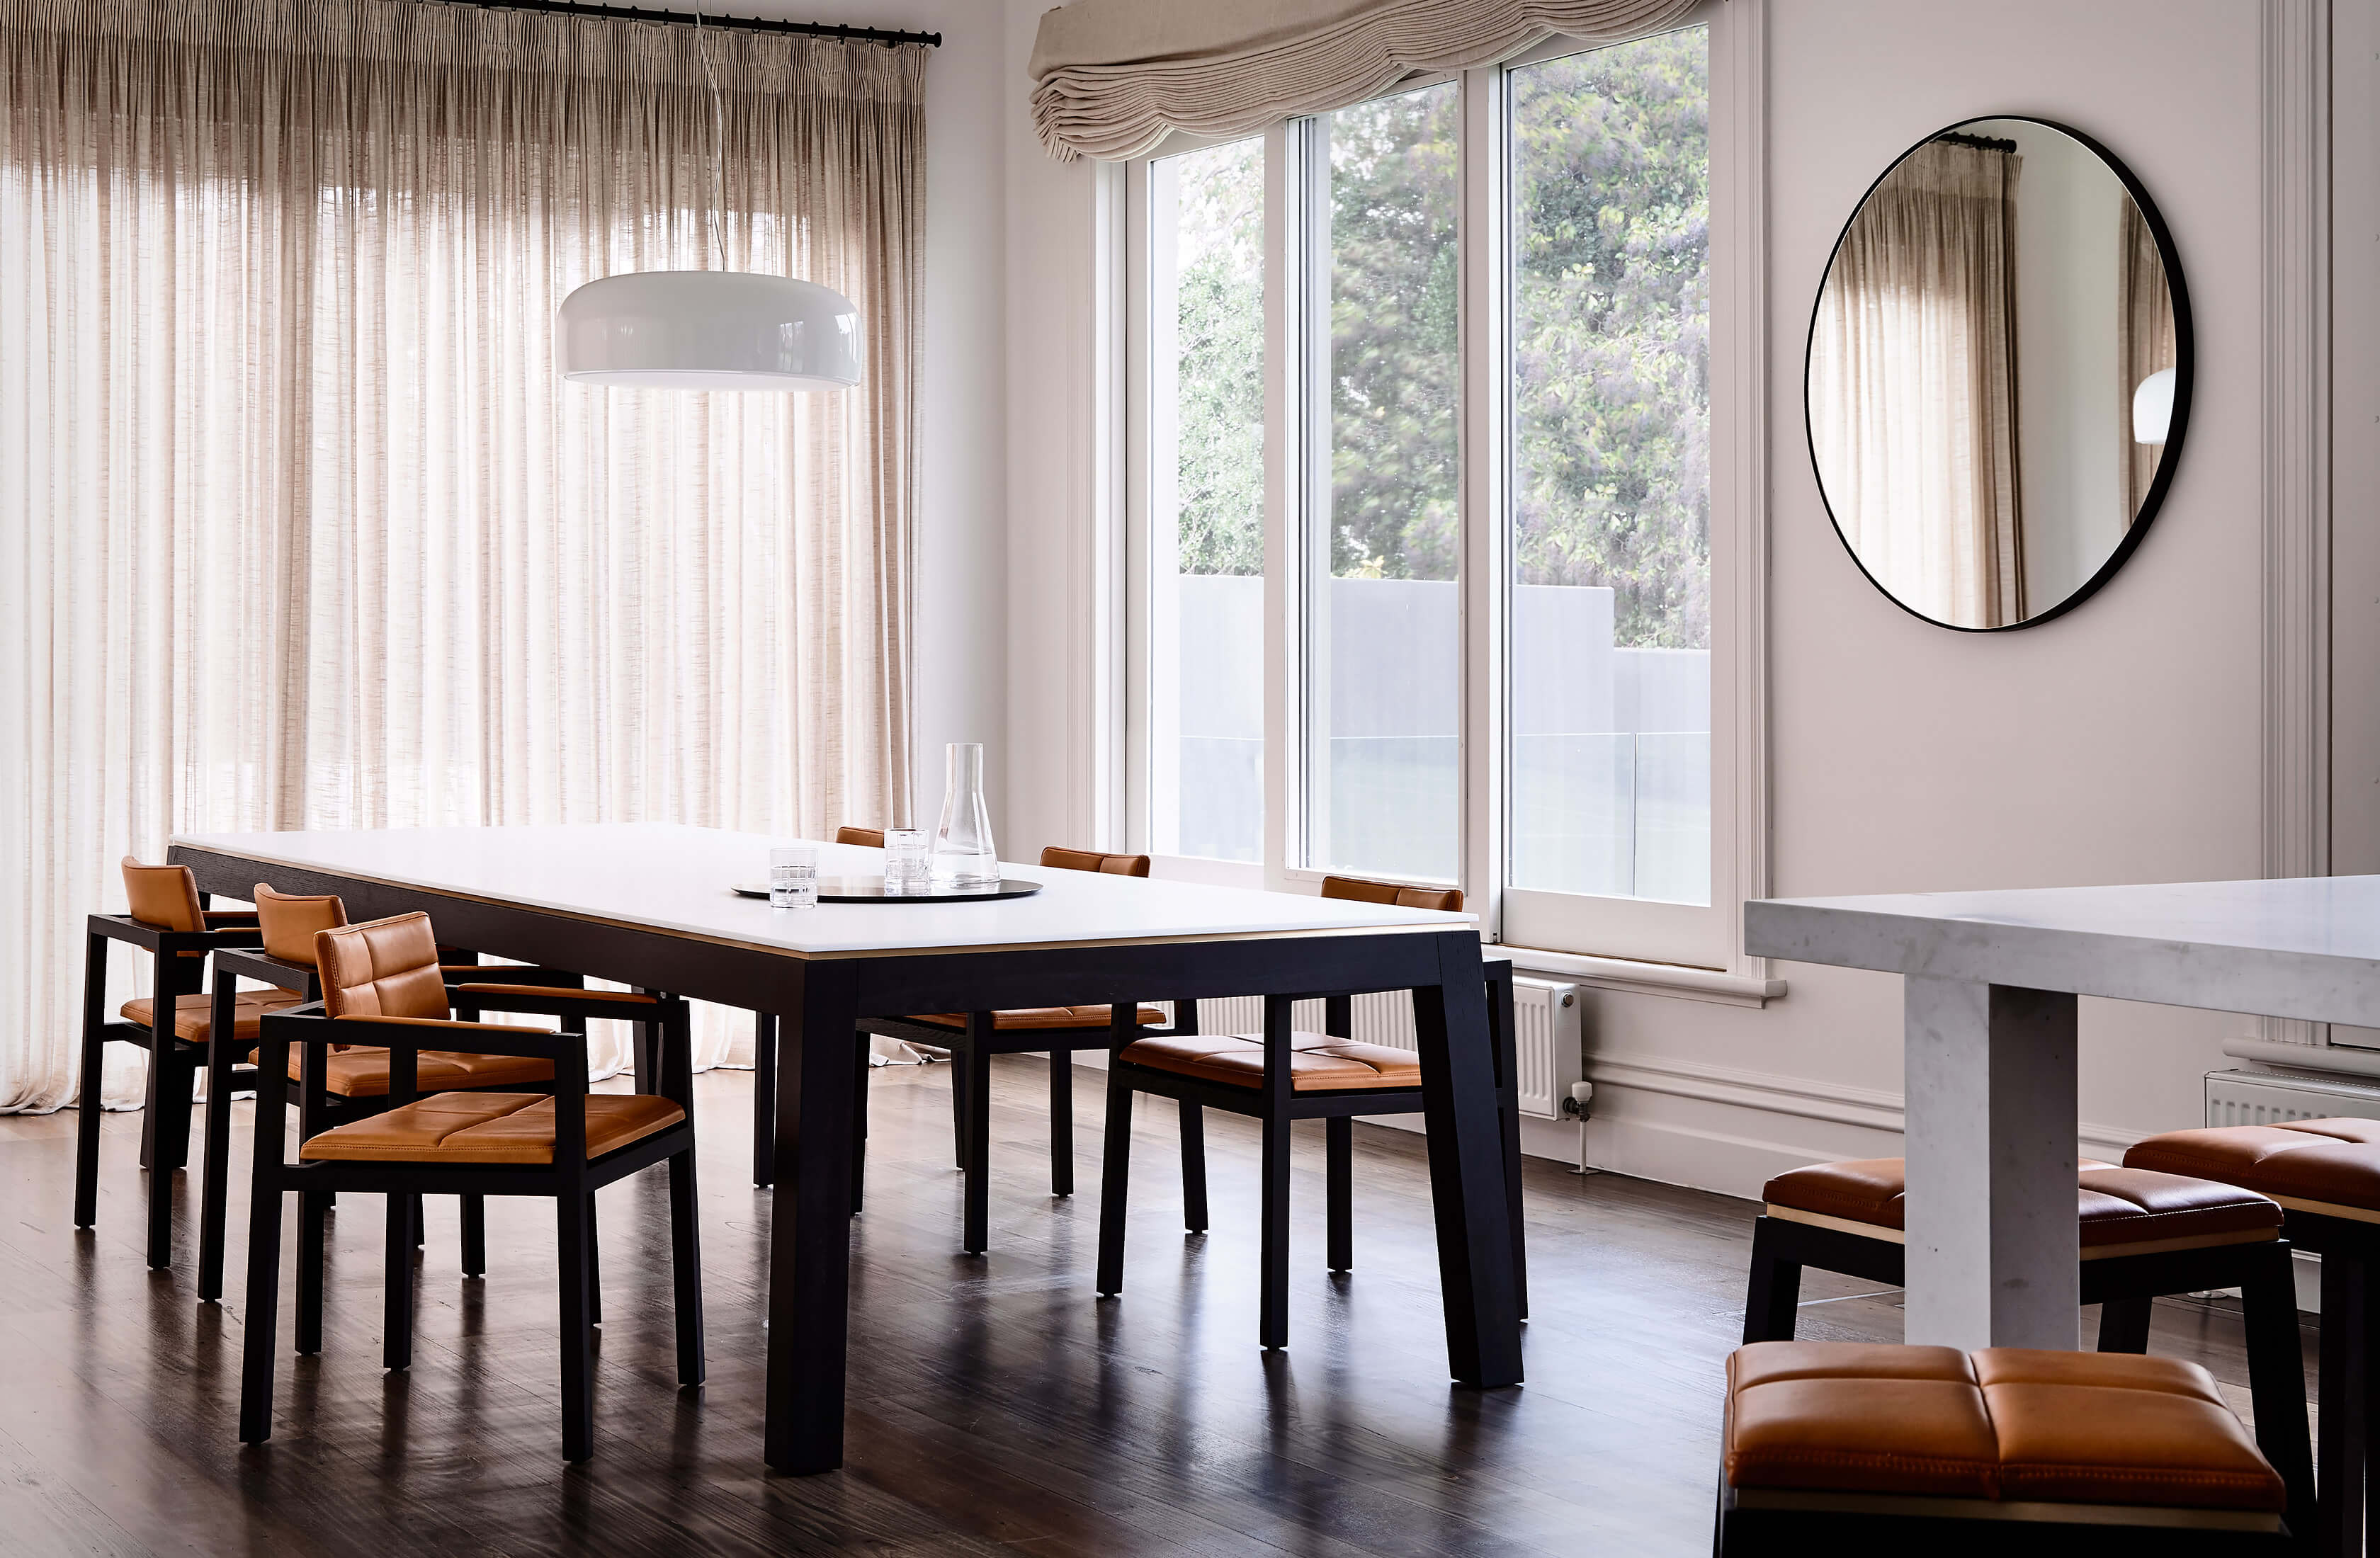 Soft linen curtains anchor the background of this refined luxury home with Australian designer FrancoCrea's designer dining table and chairs stealing the show